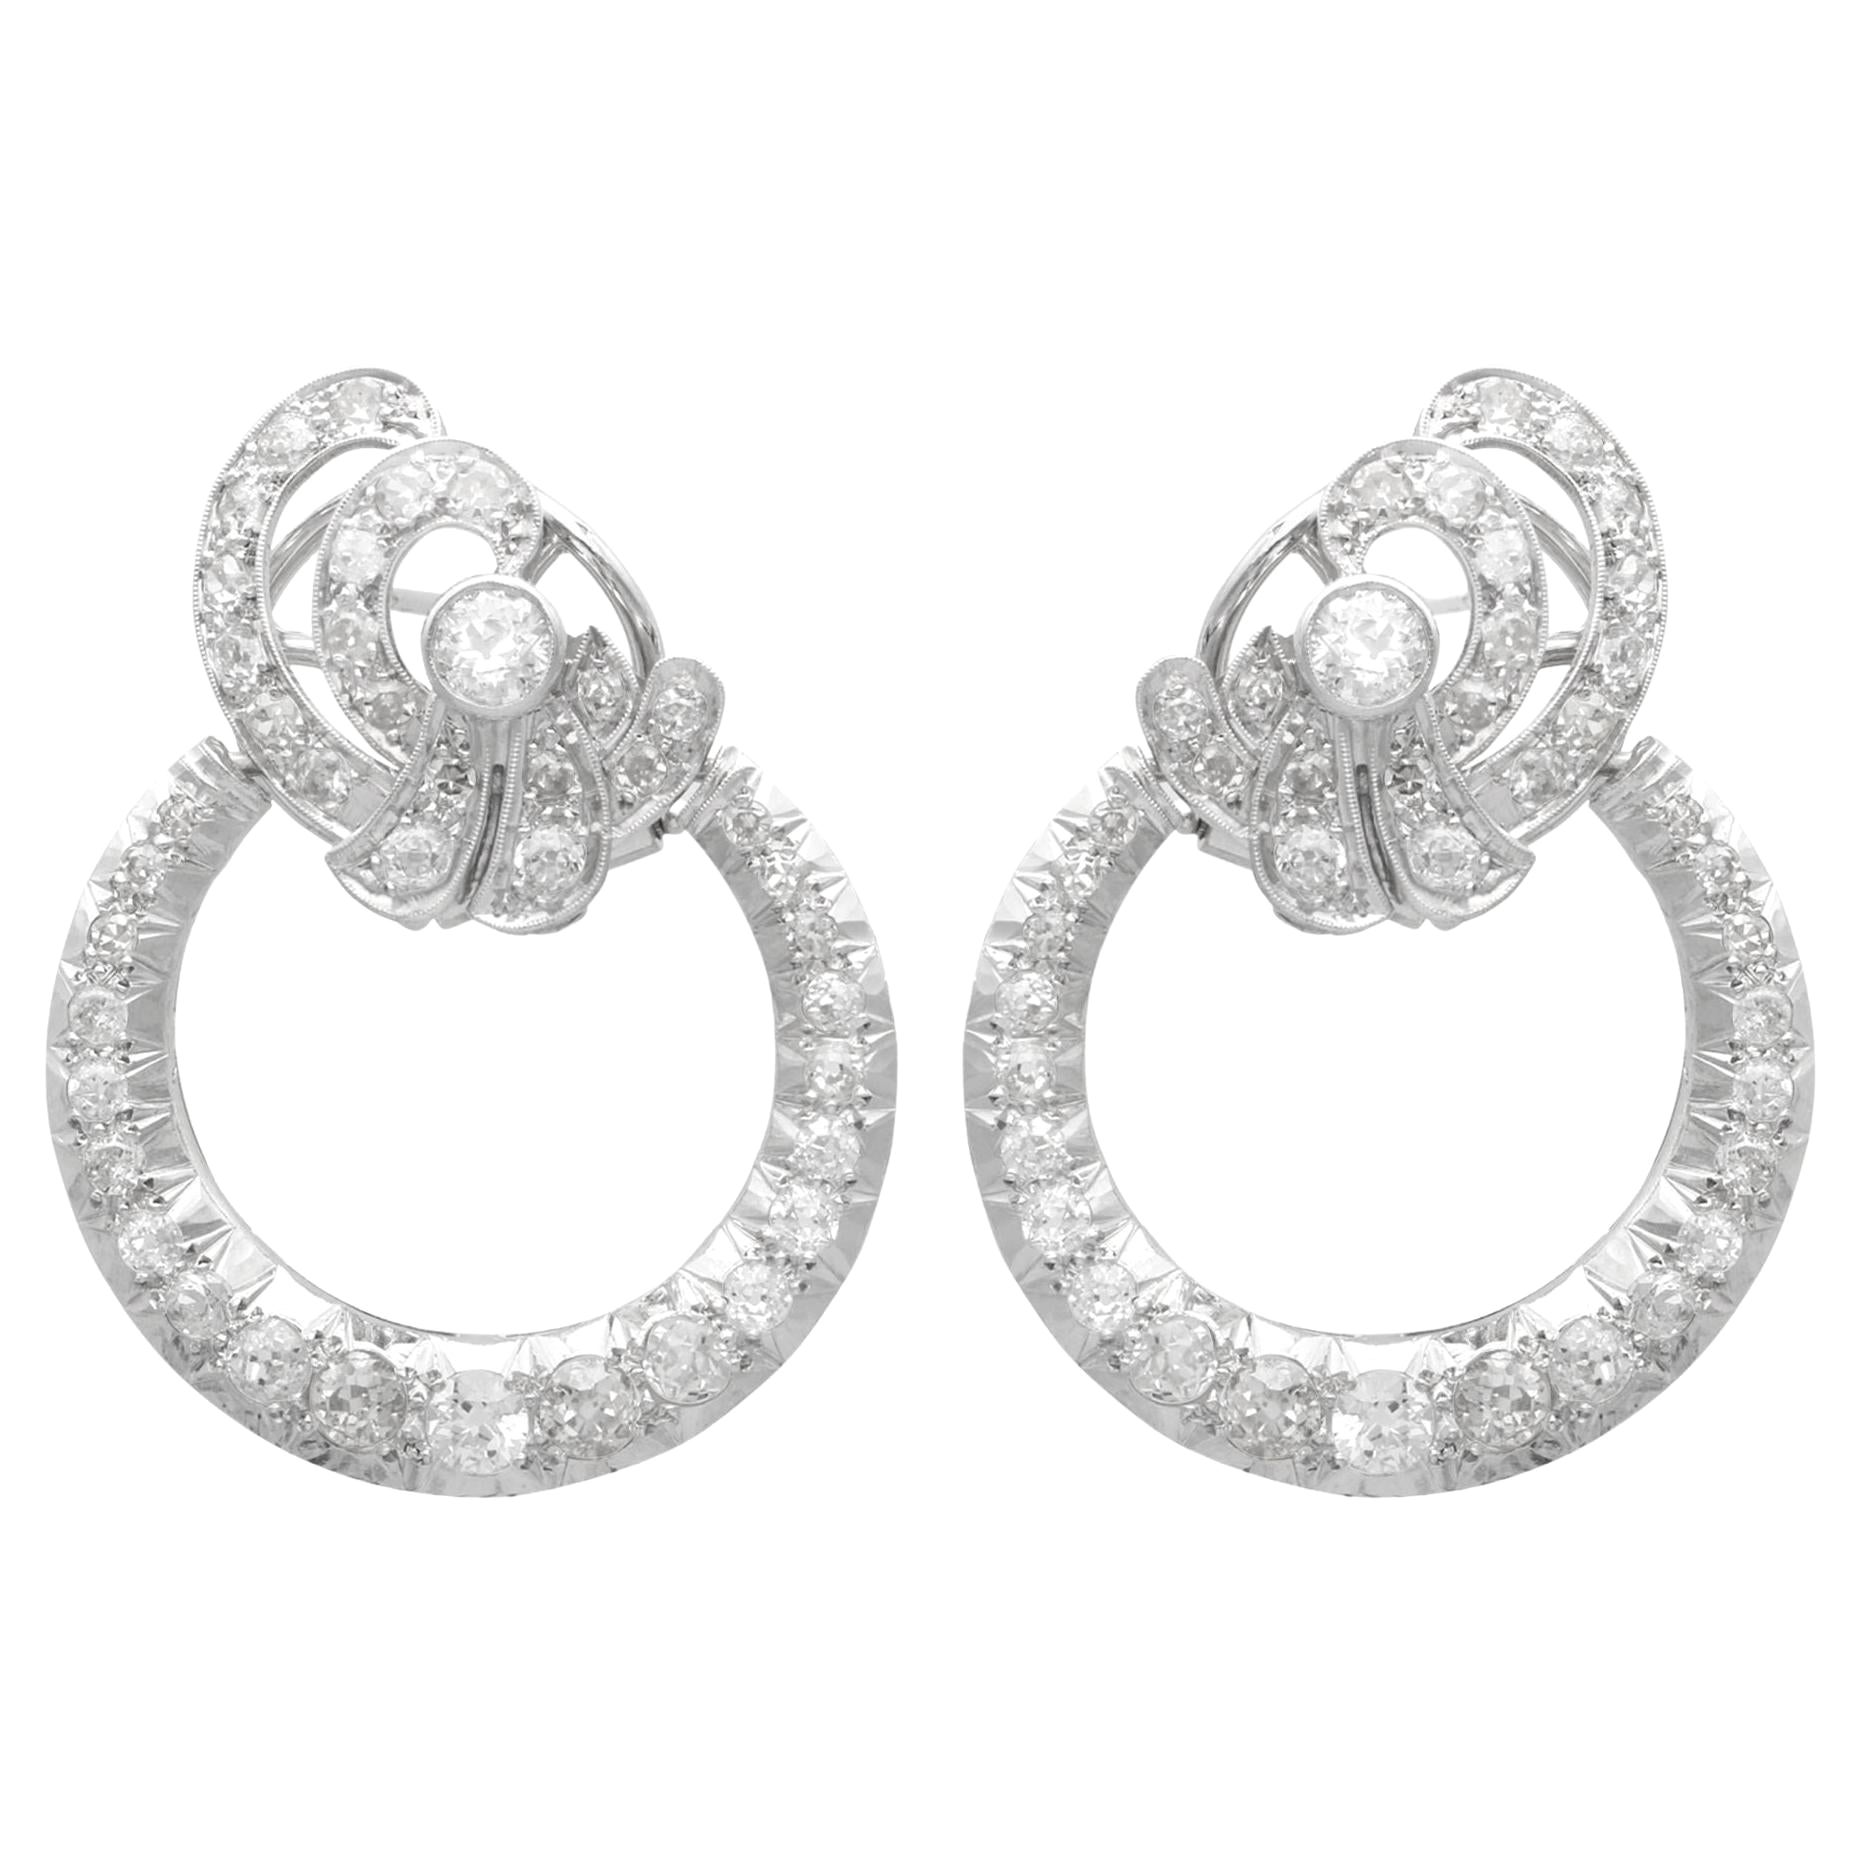 1930s Antique Diamond and Platinum Circular Earrings For Sale